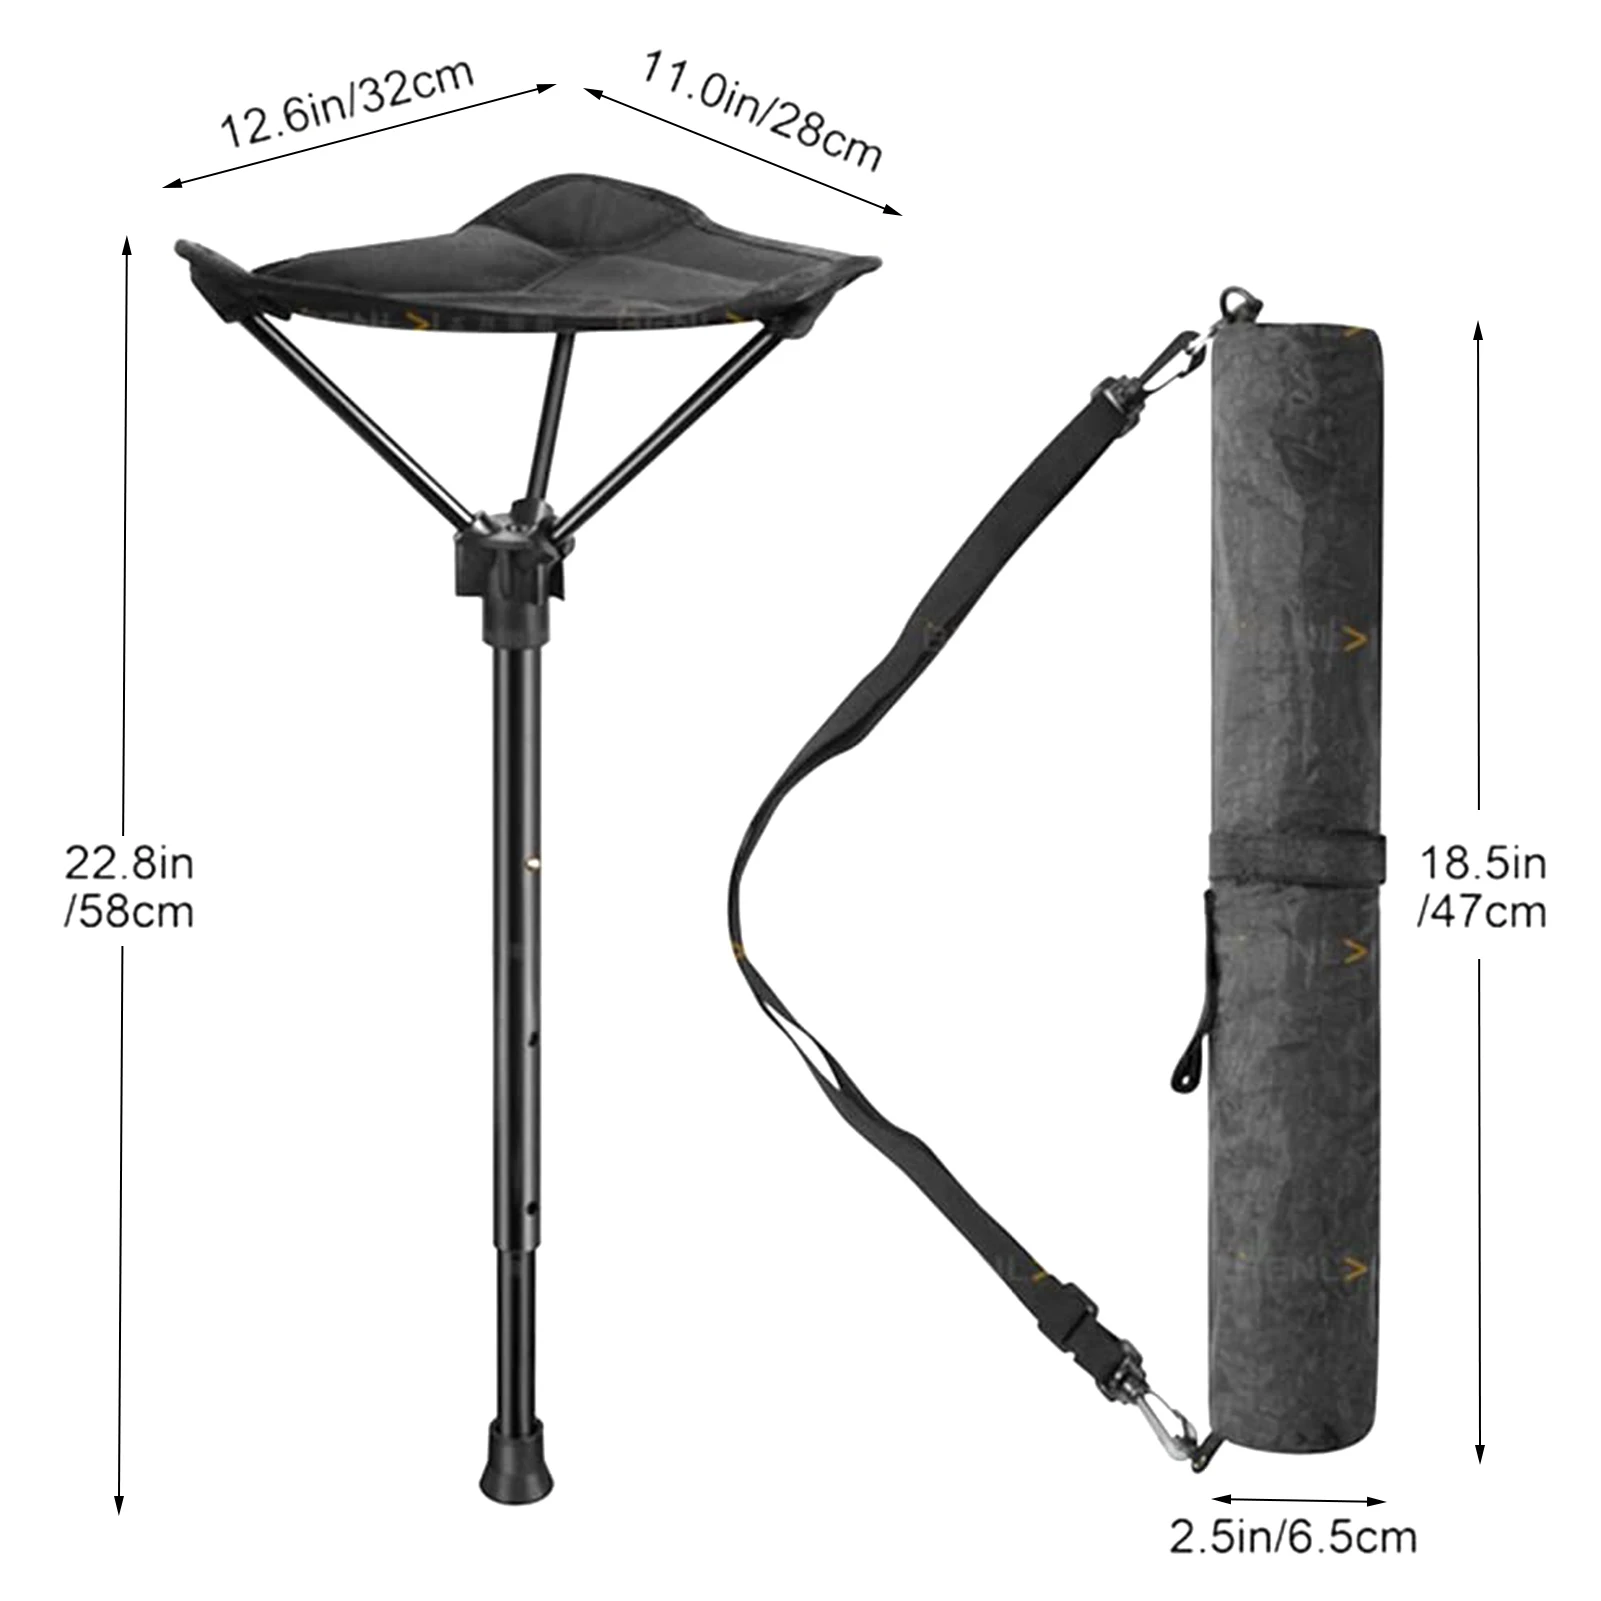 Outdoor Portable Telescopic Adjustable Chairless Chair Exoskeleton